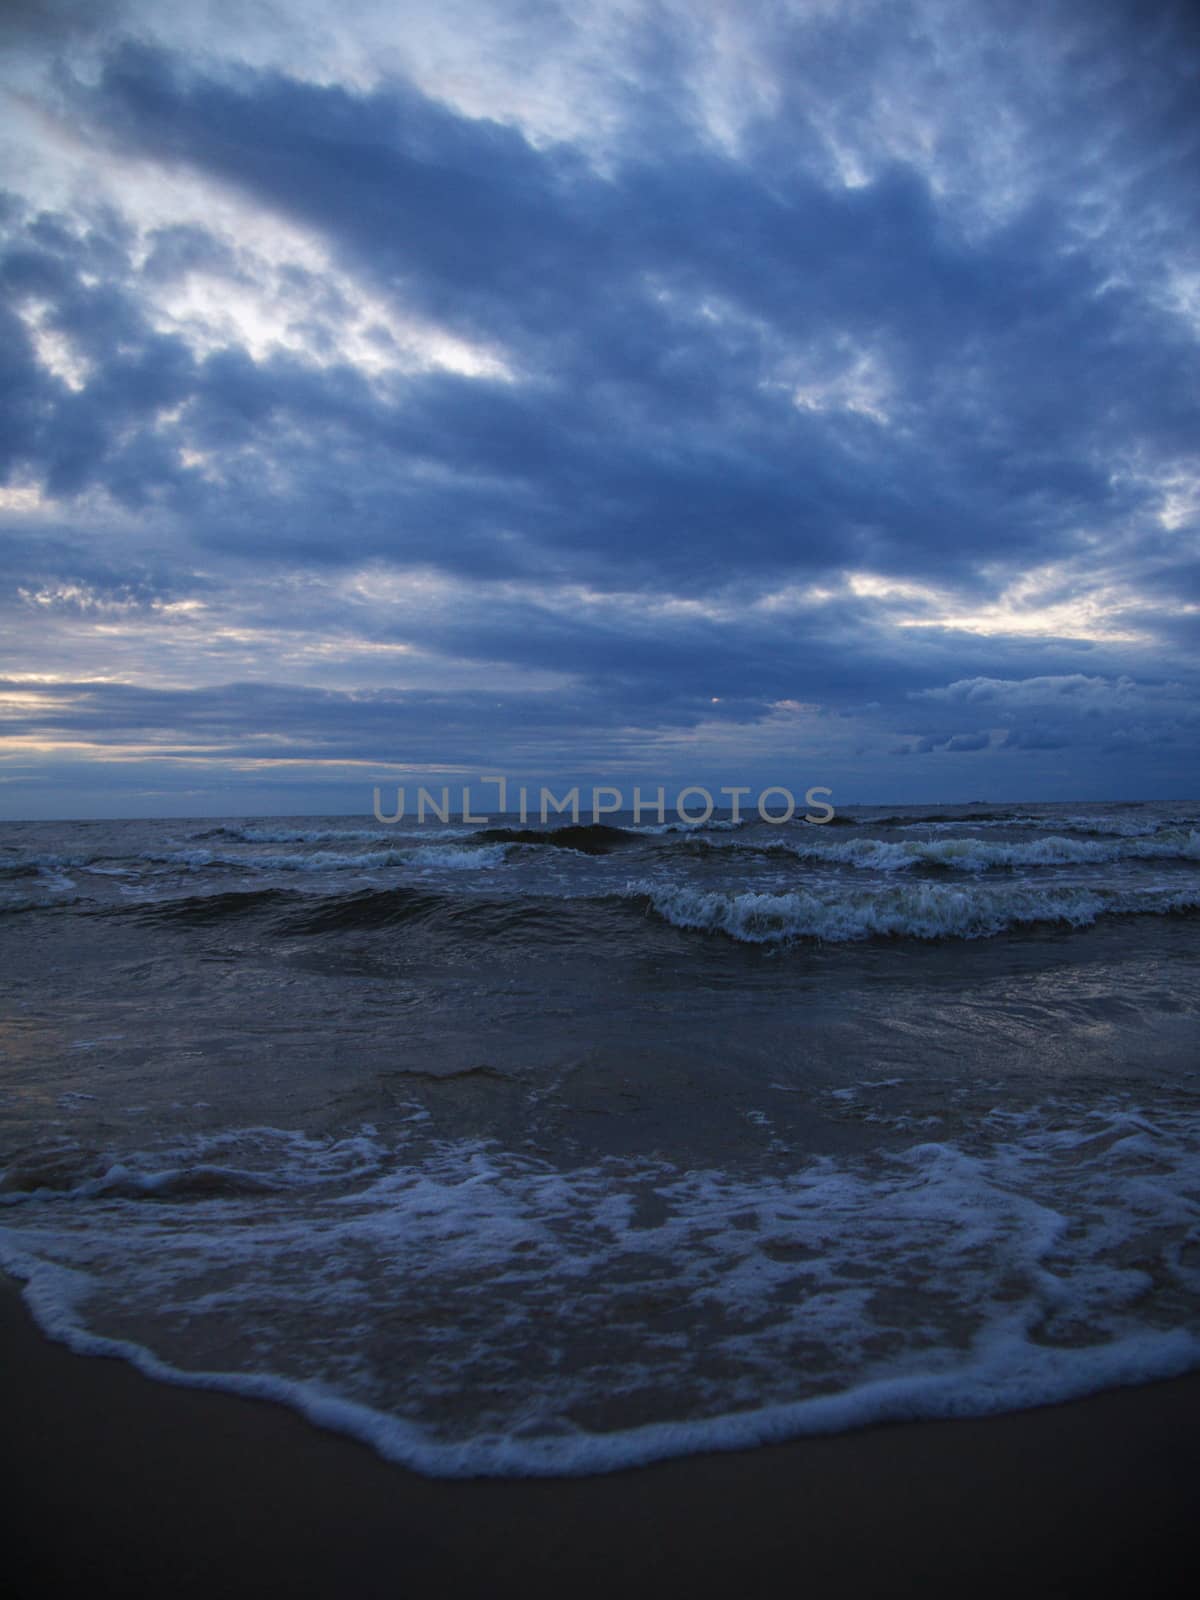 Waves in the Baltic Sea in the evening